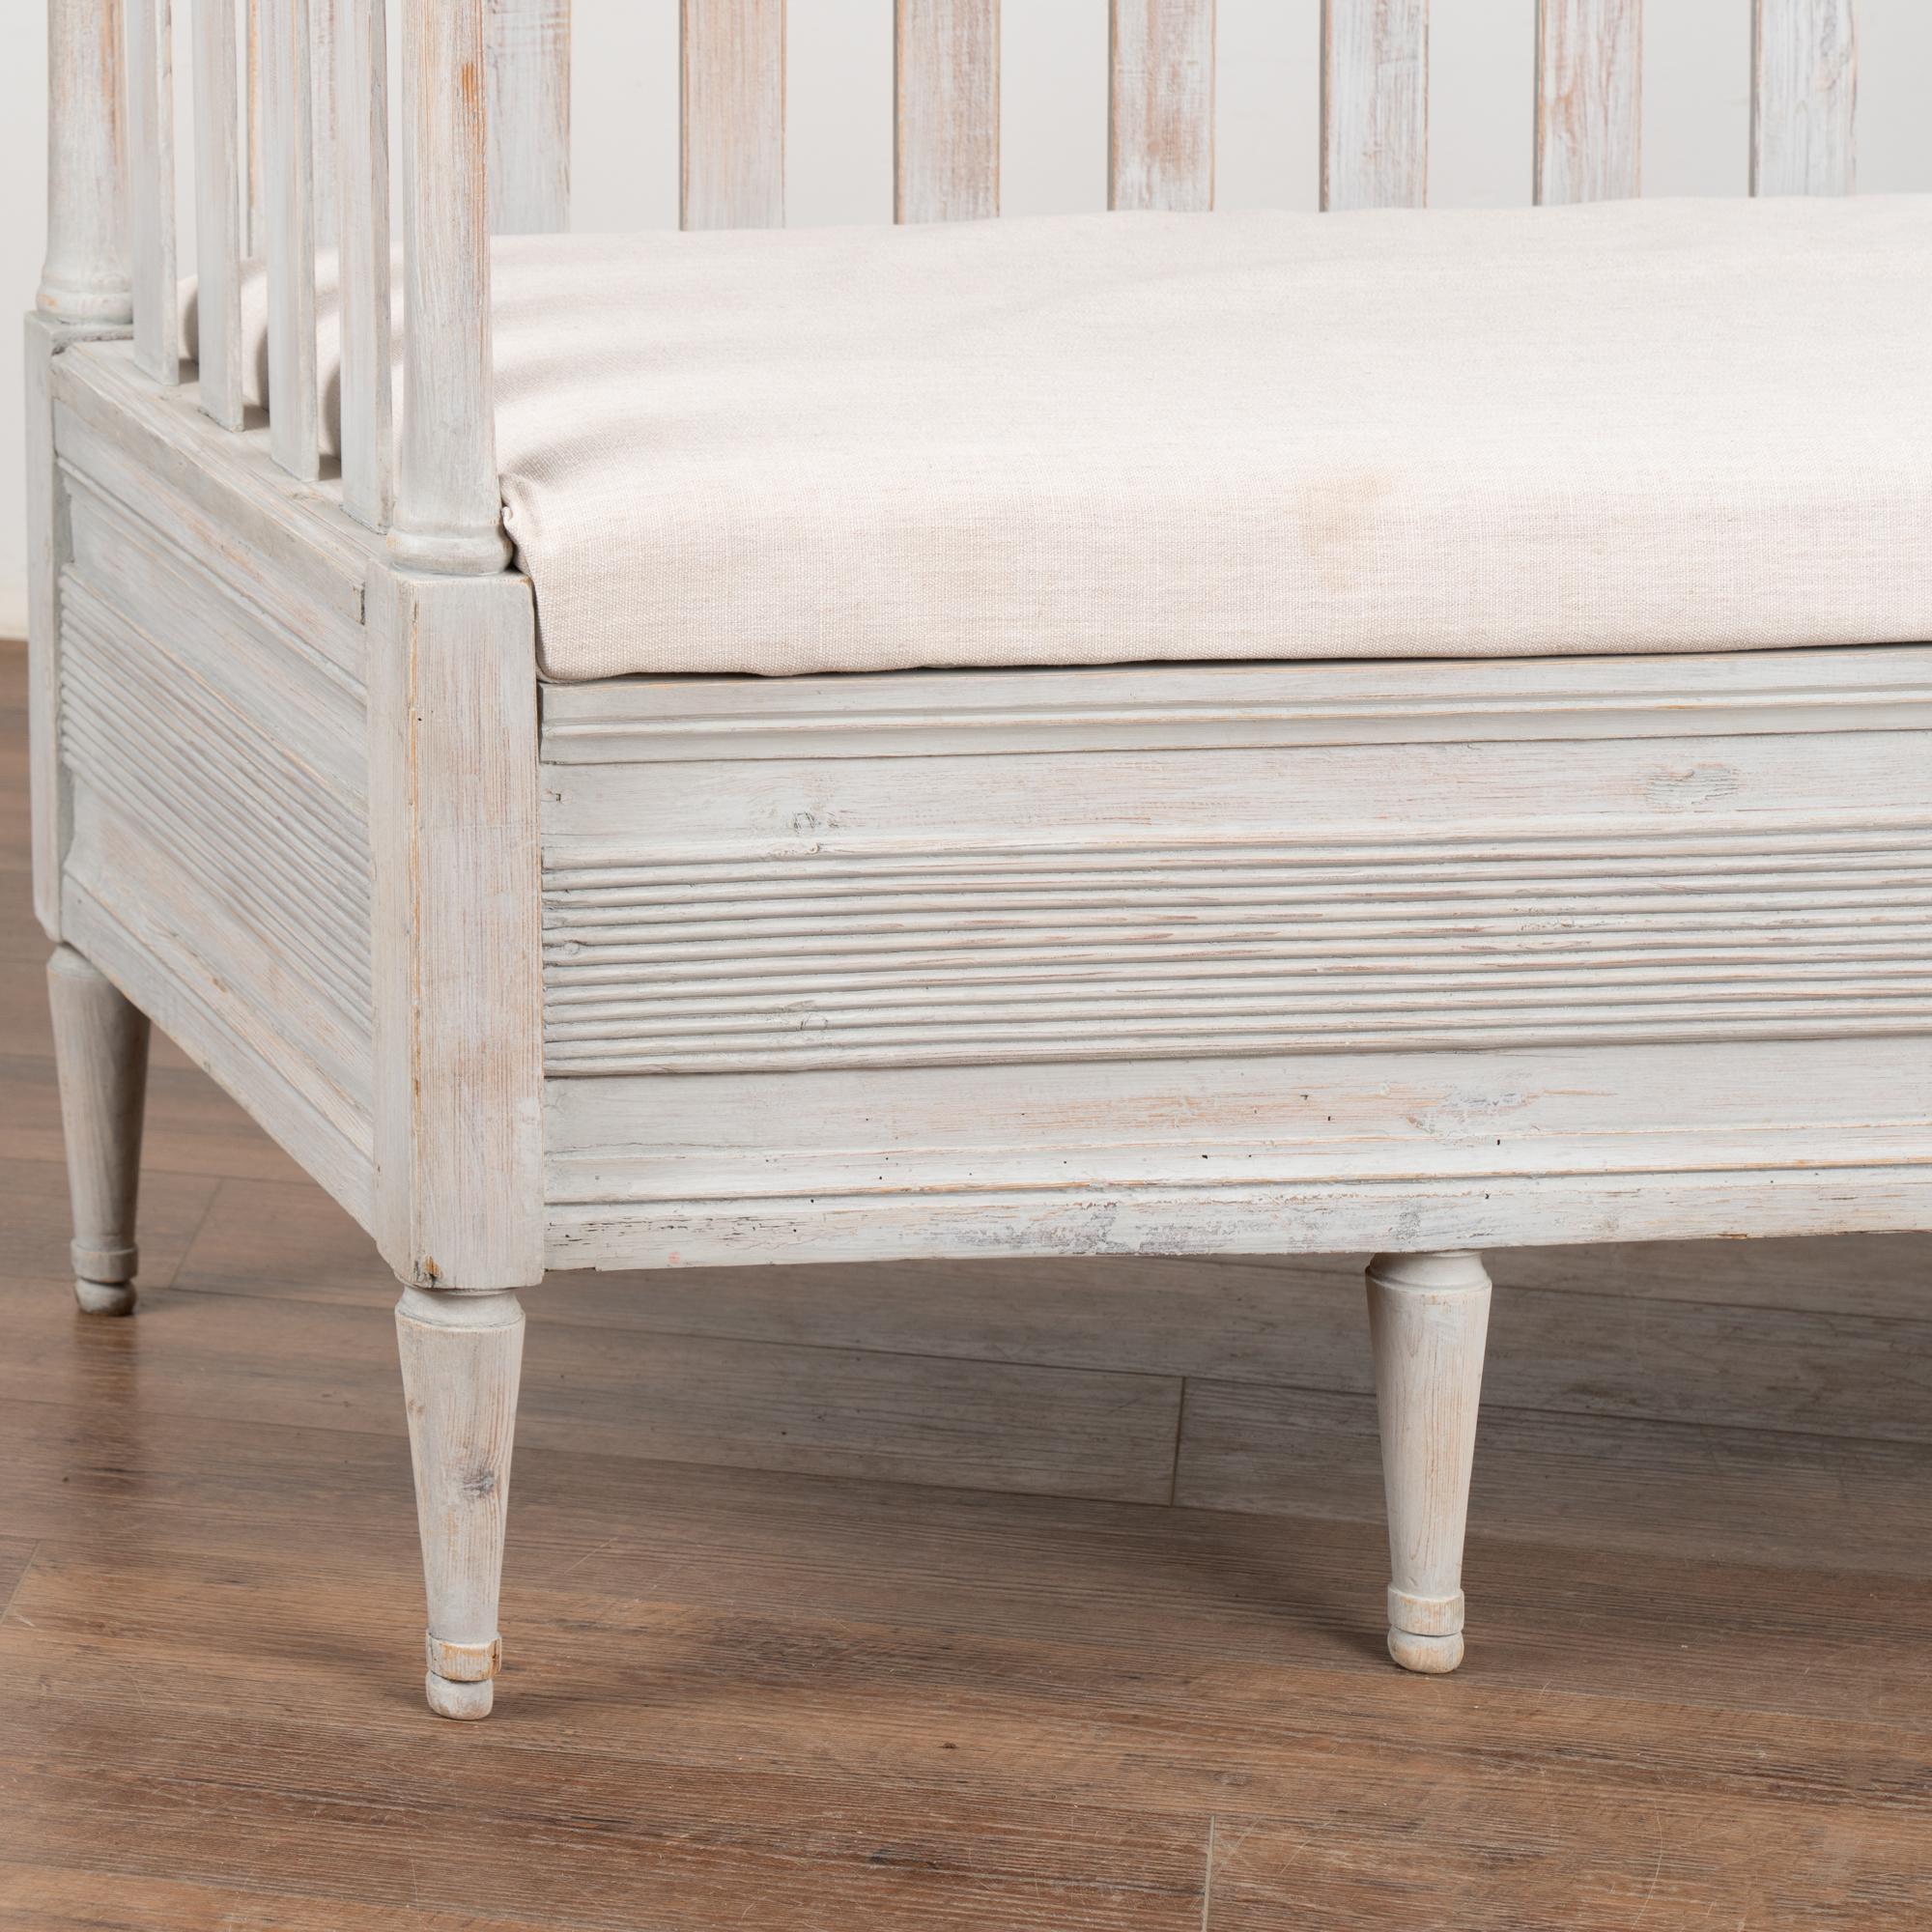 Linen Gray Painted Gustavian Bench With Storage, Sweden circa 1840 For Sale